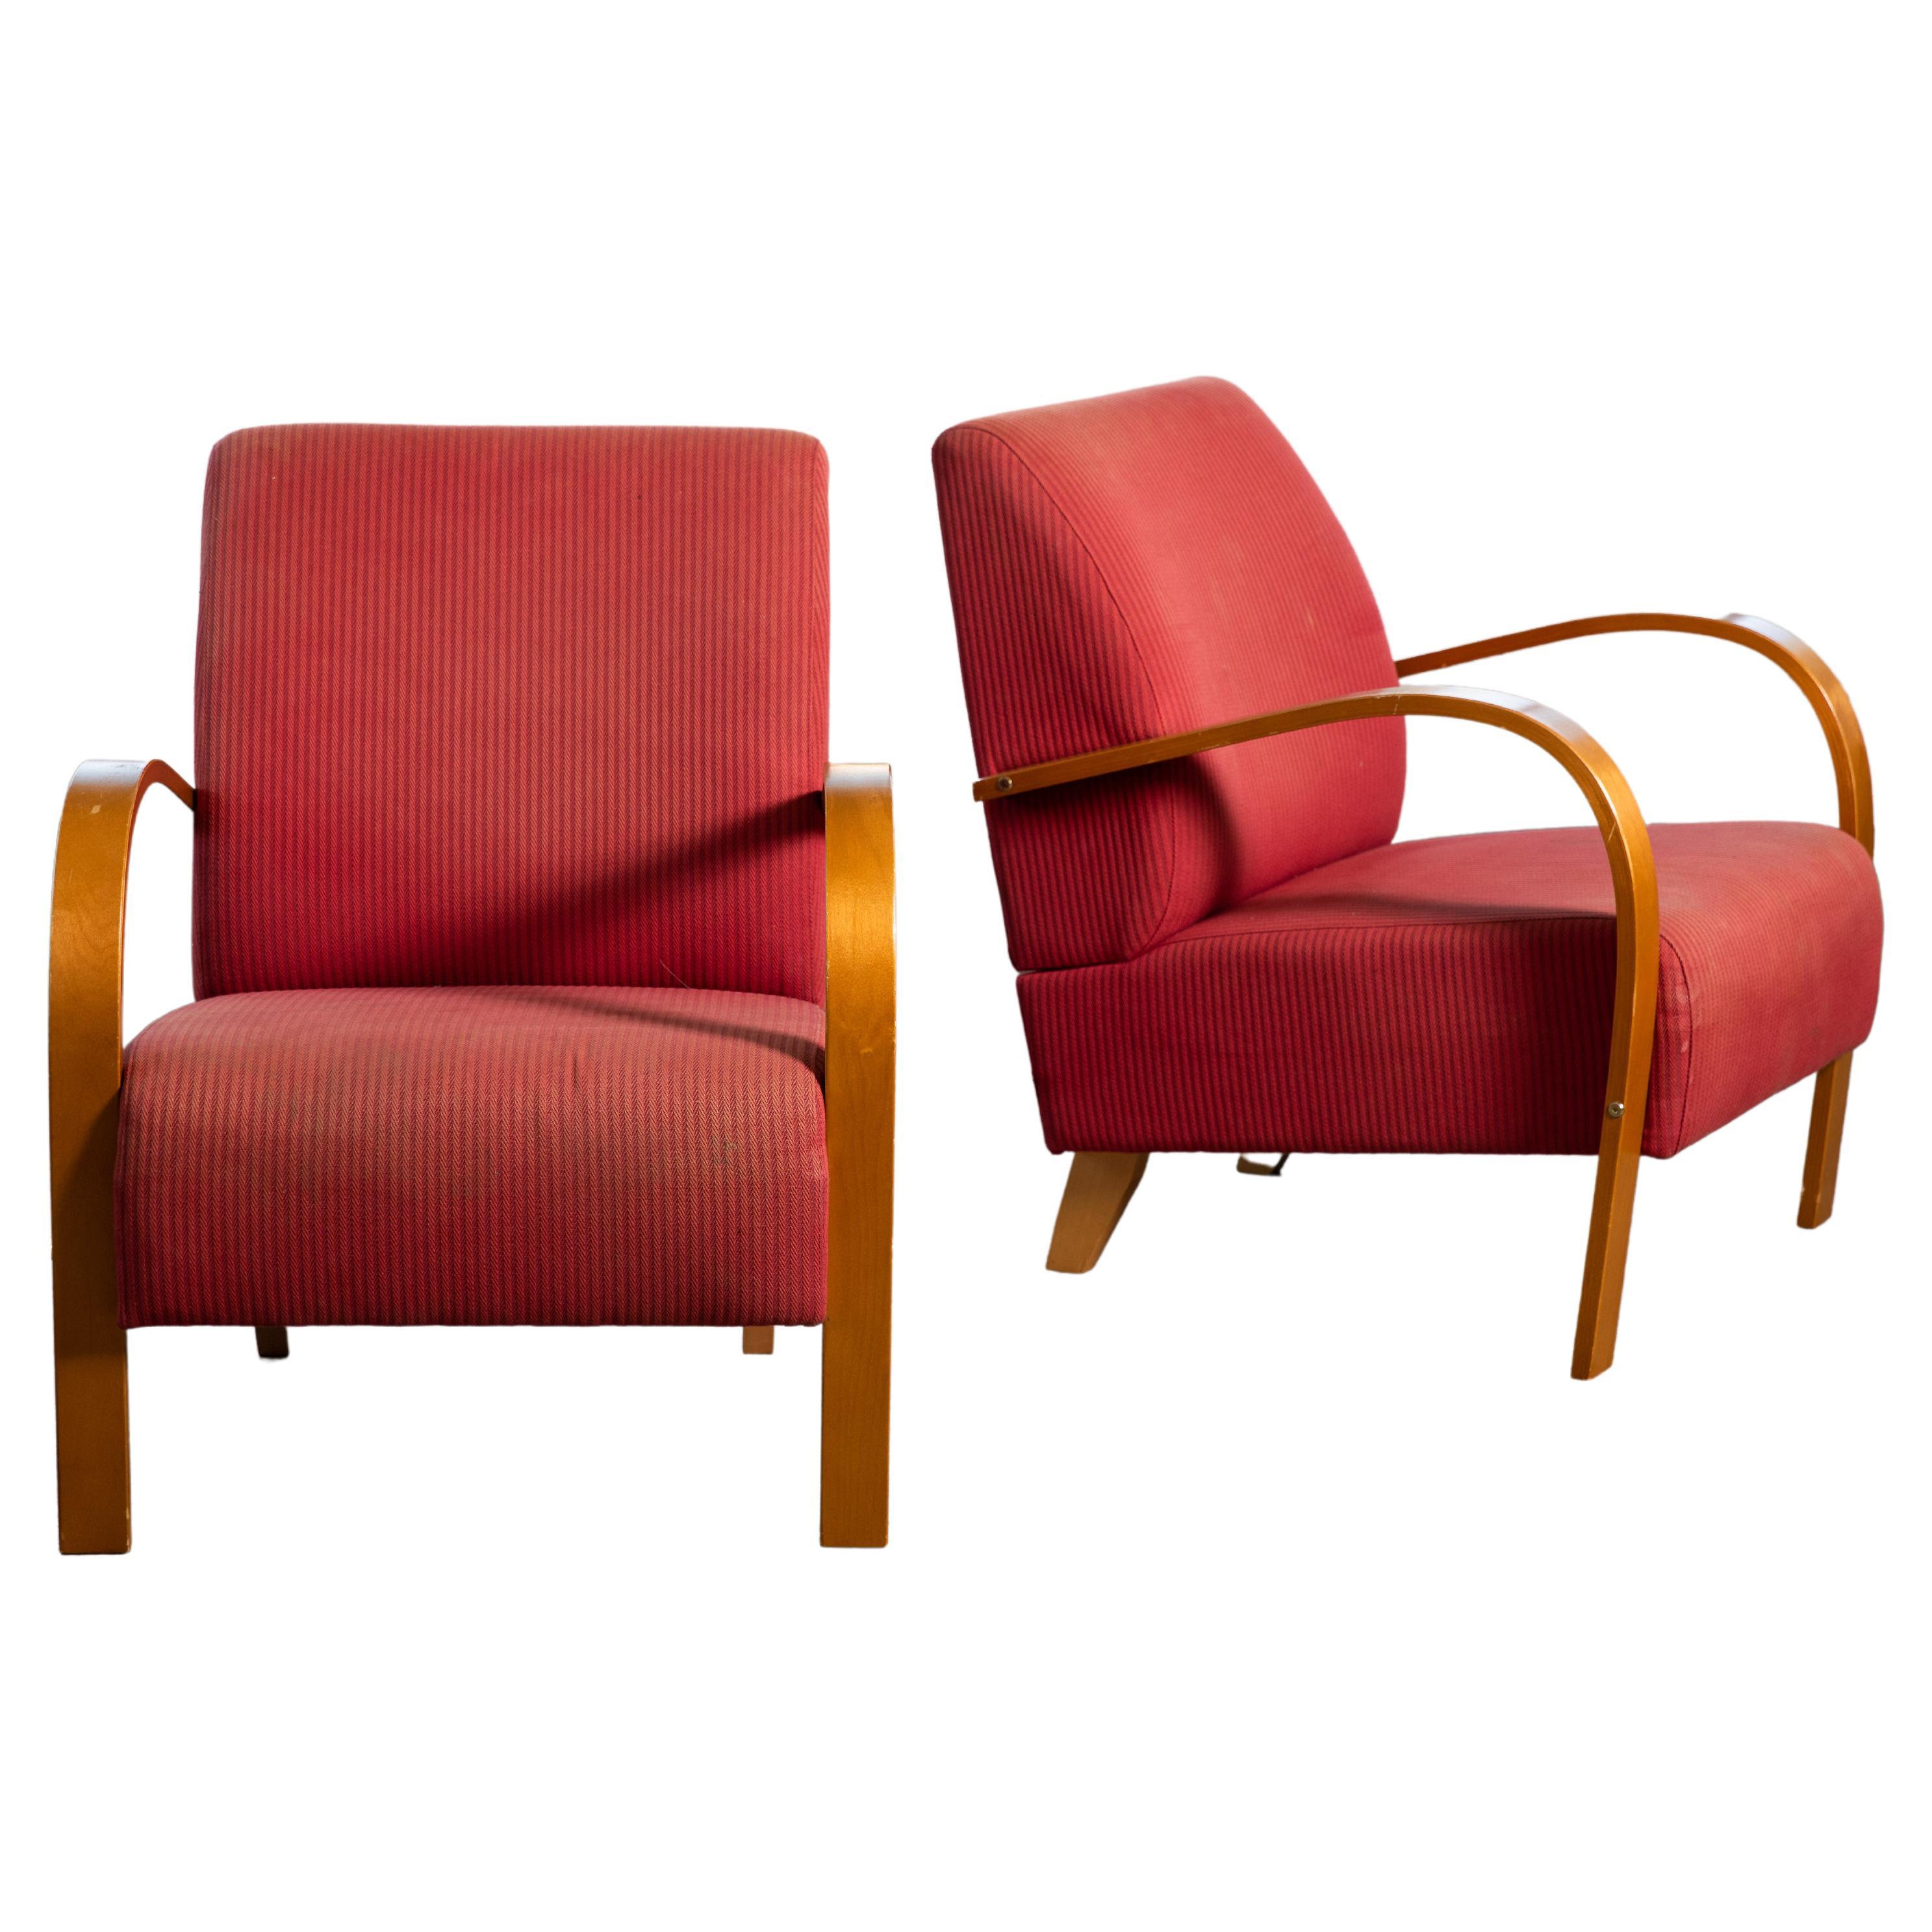 Pair of Danish Early Midcentury or Art Deco Style Low Lounge Chairs 